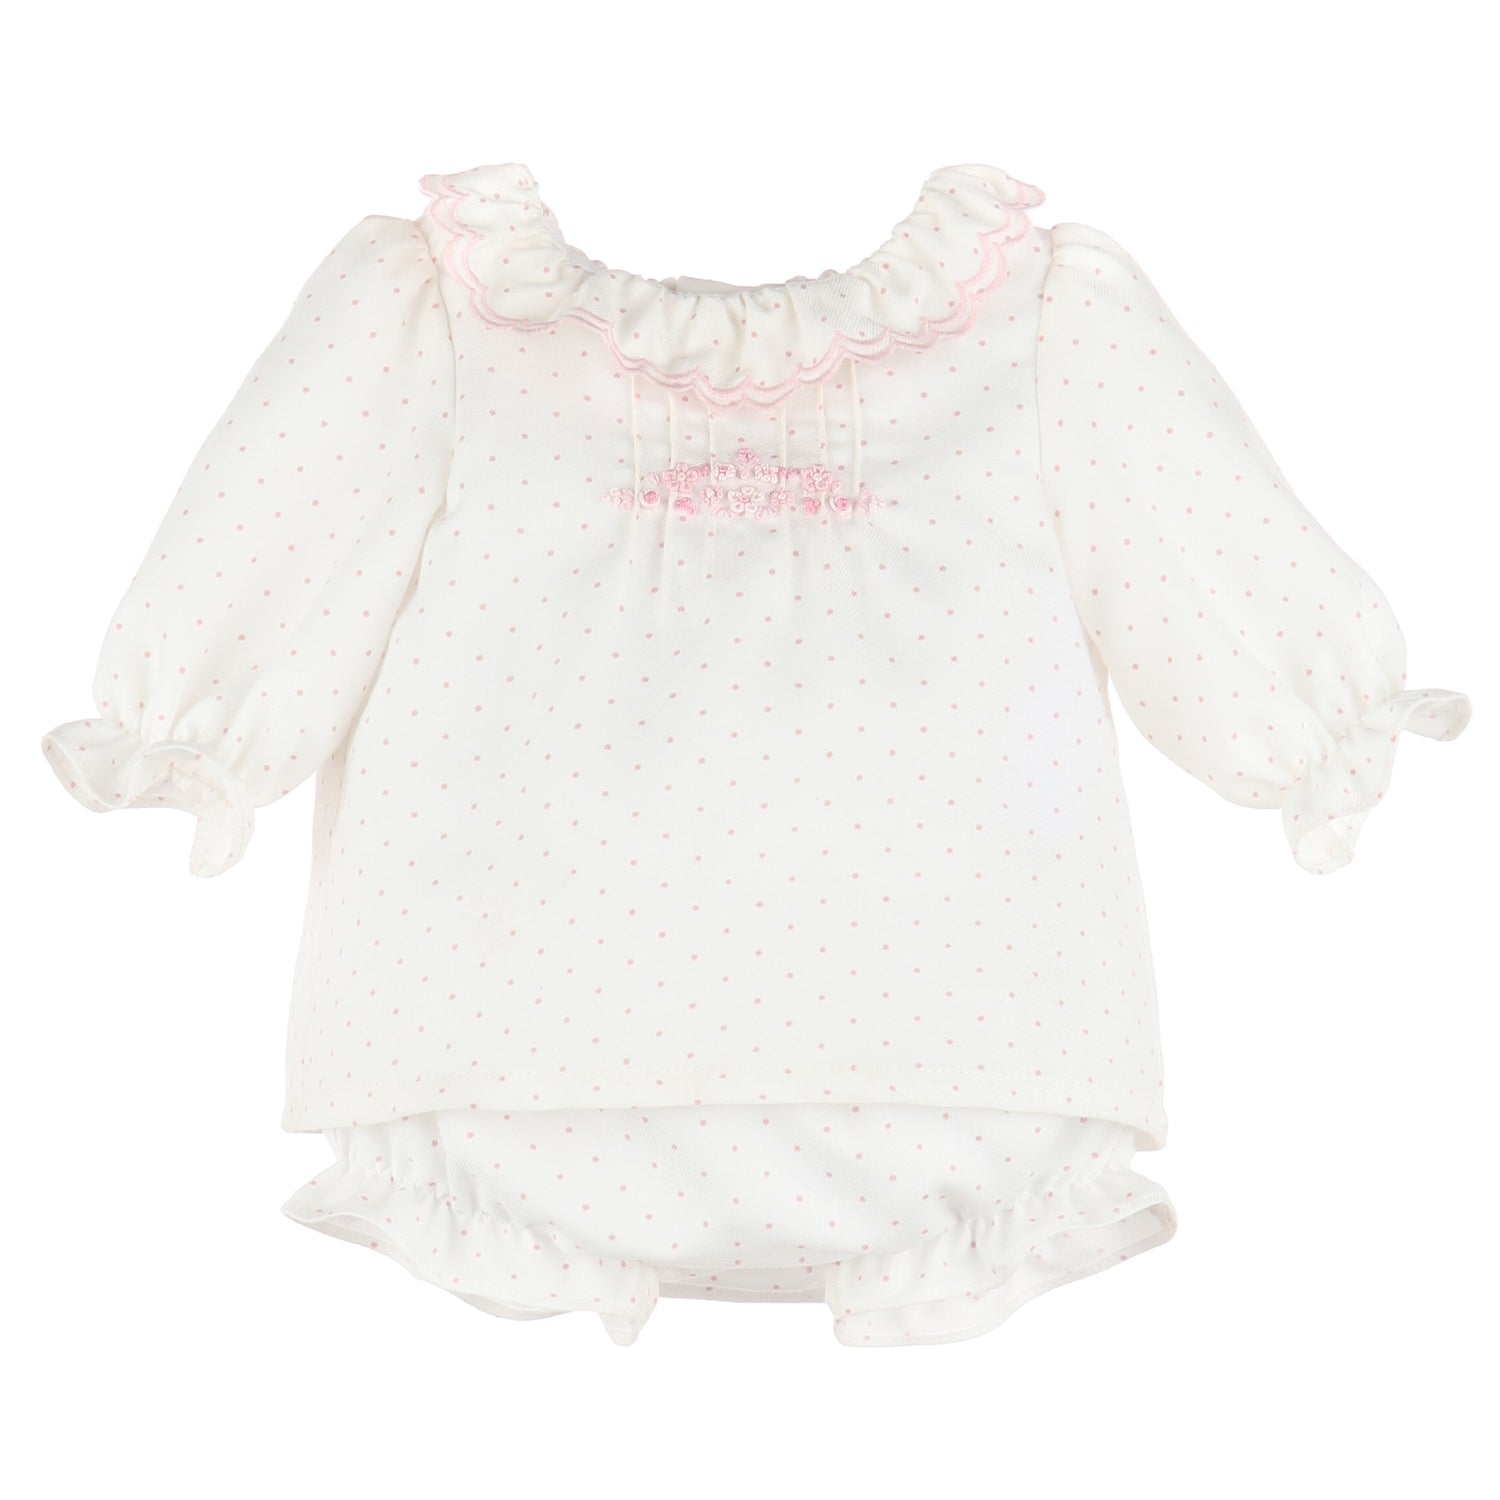 White & Pink Dot Embroidered Set